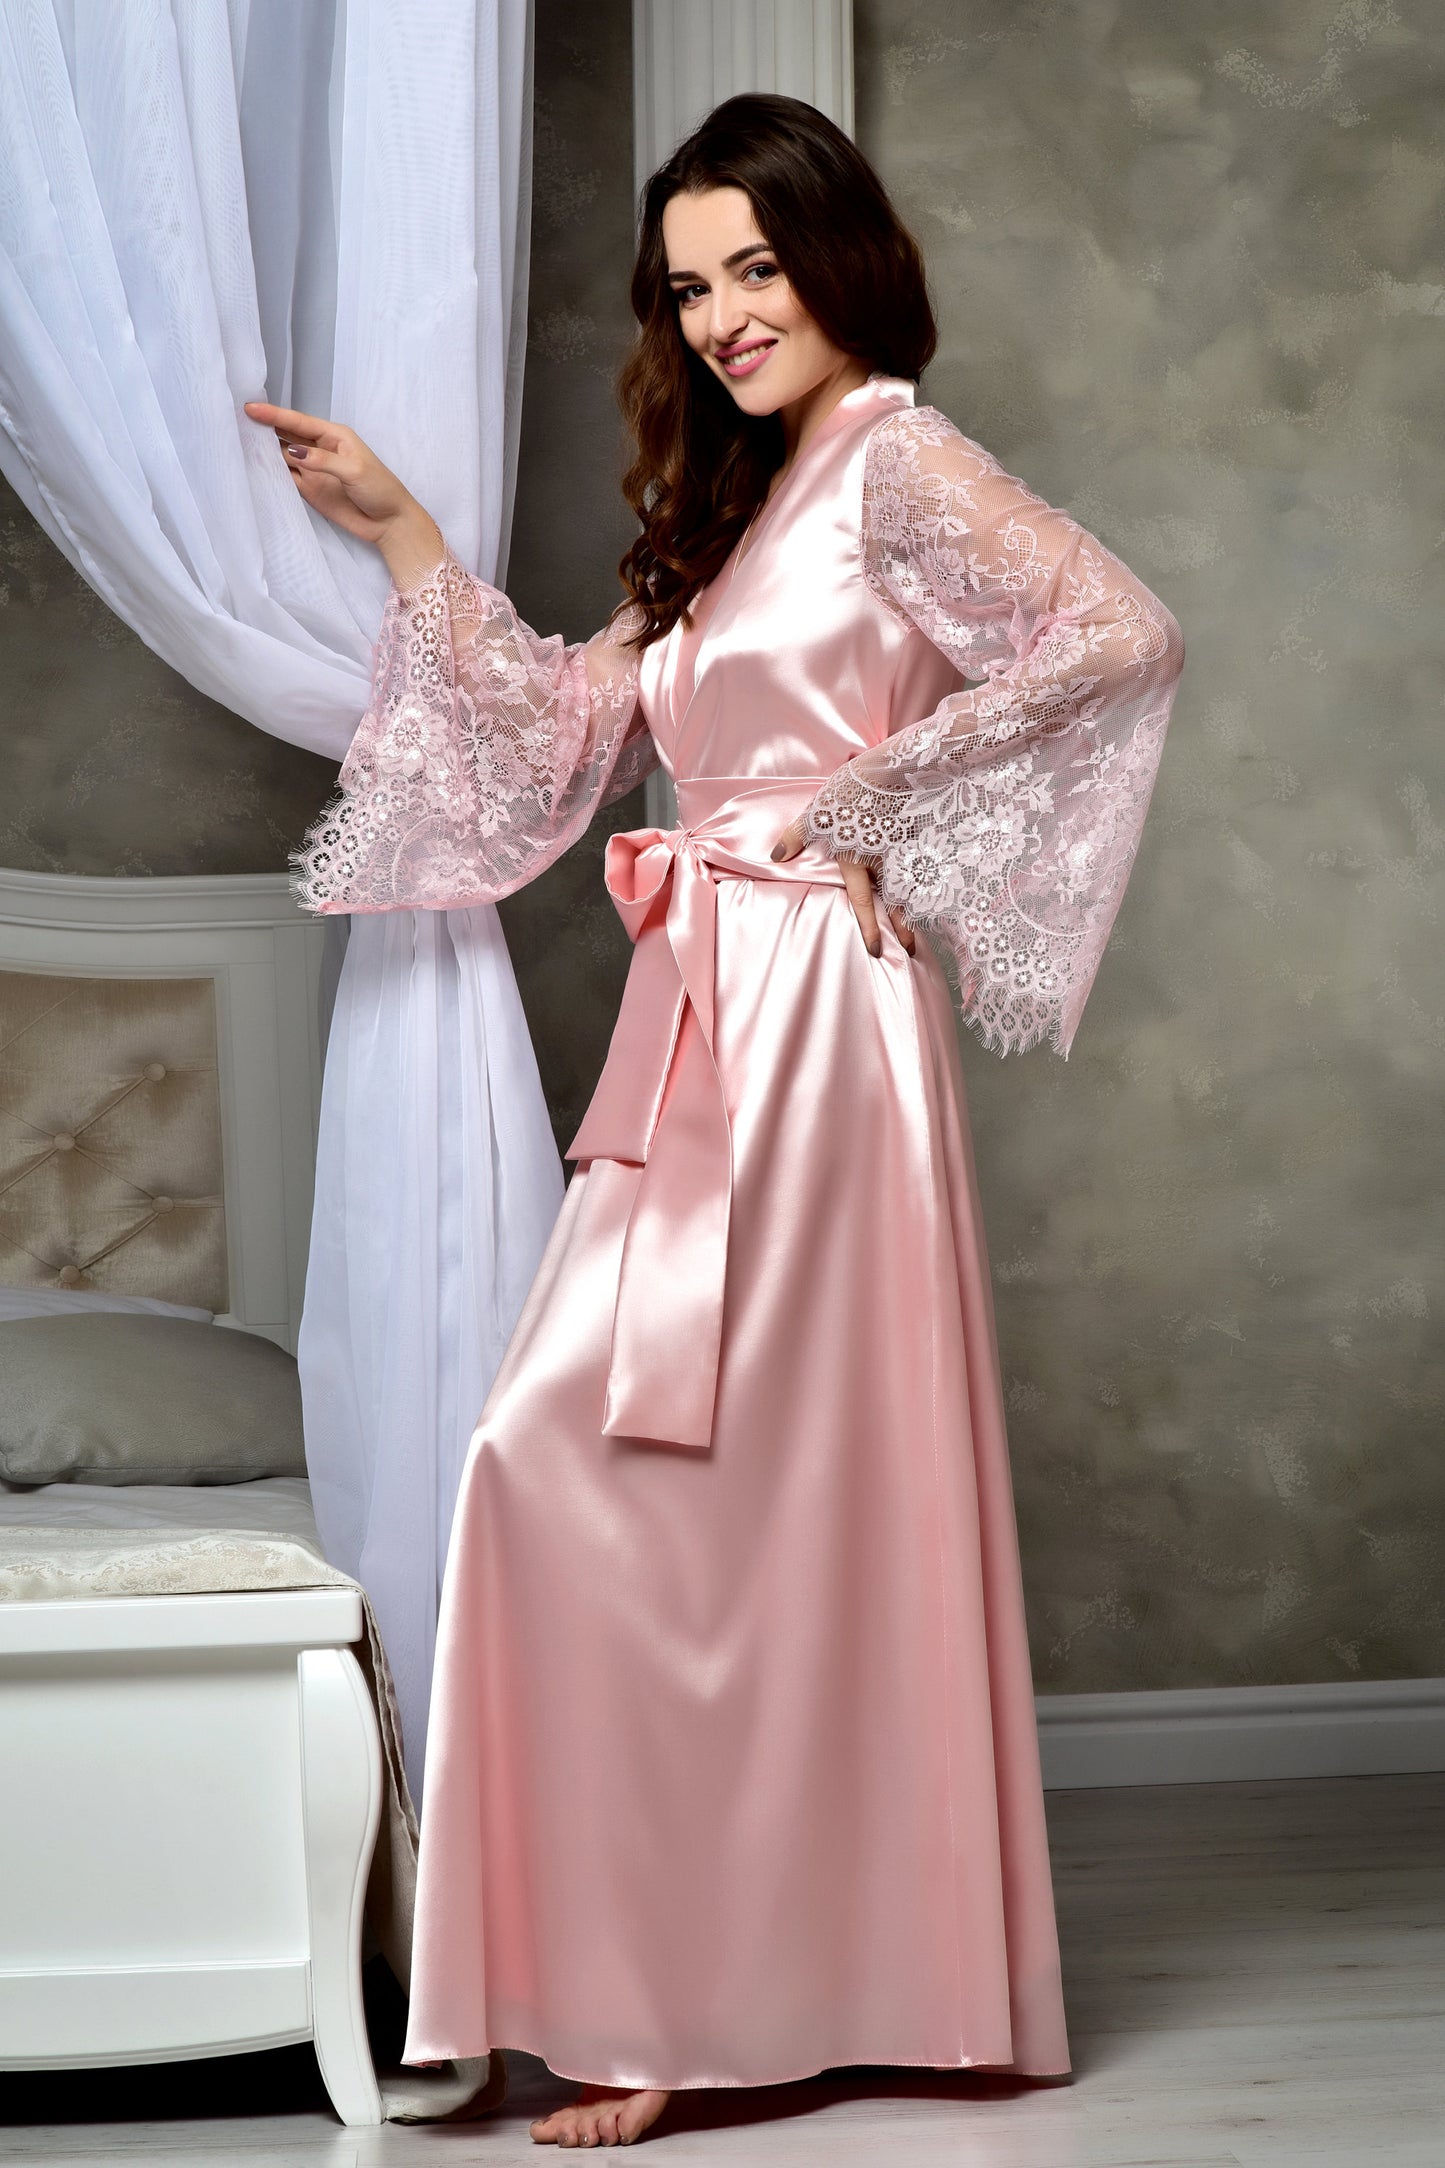 Chantilly Lace Sleeve Bridal Robe in Blush Pink - Classic Elegance for Brides